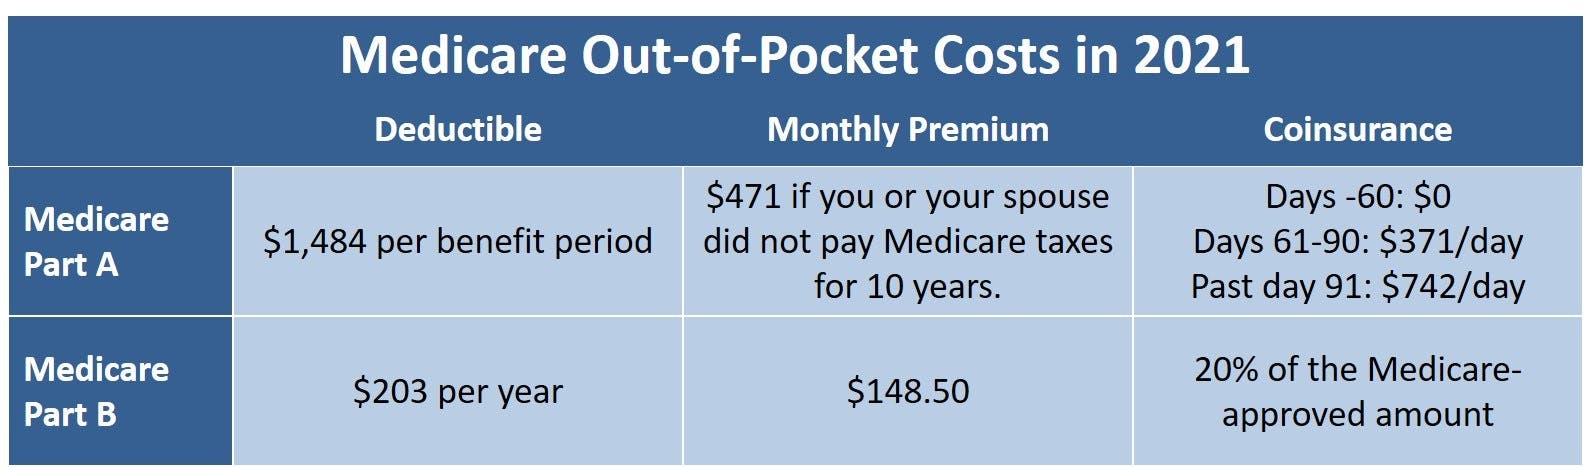 Medicare Out of Pocket Costs